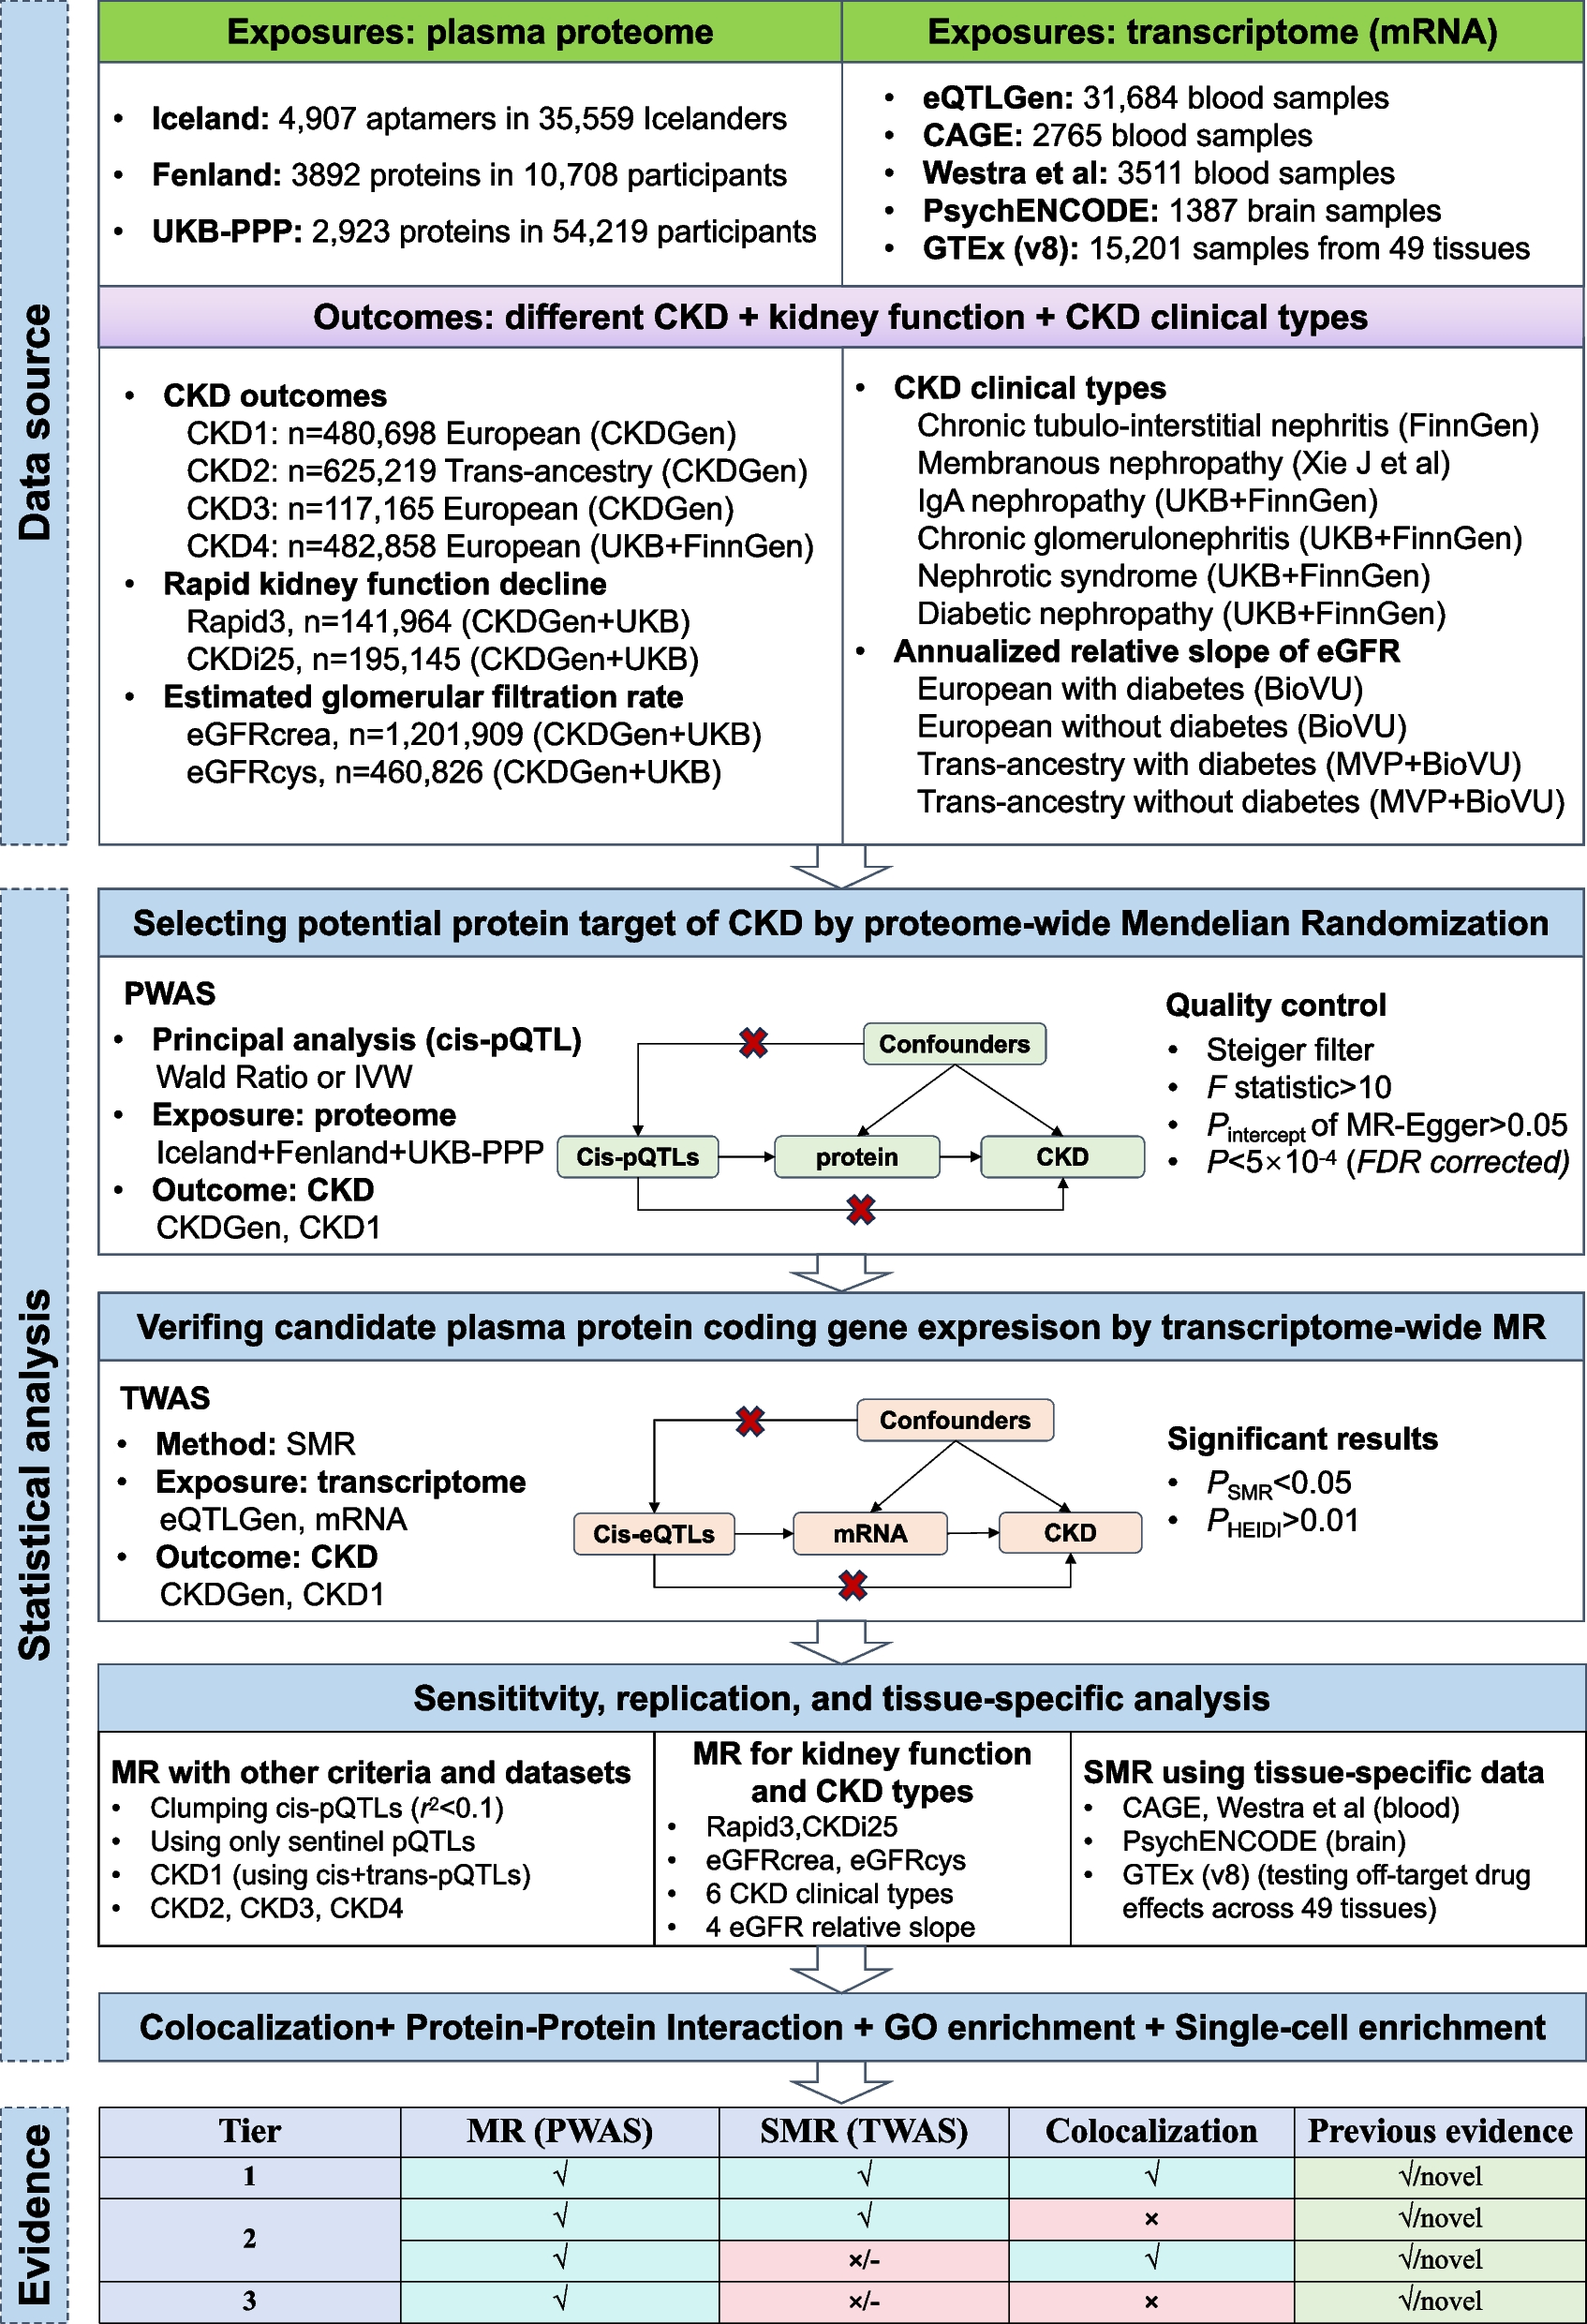 Identification of novel therapeutic targets for chronic kidney disease and kidney function by integrating multi-omics proteome with transcriptome